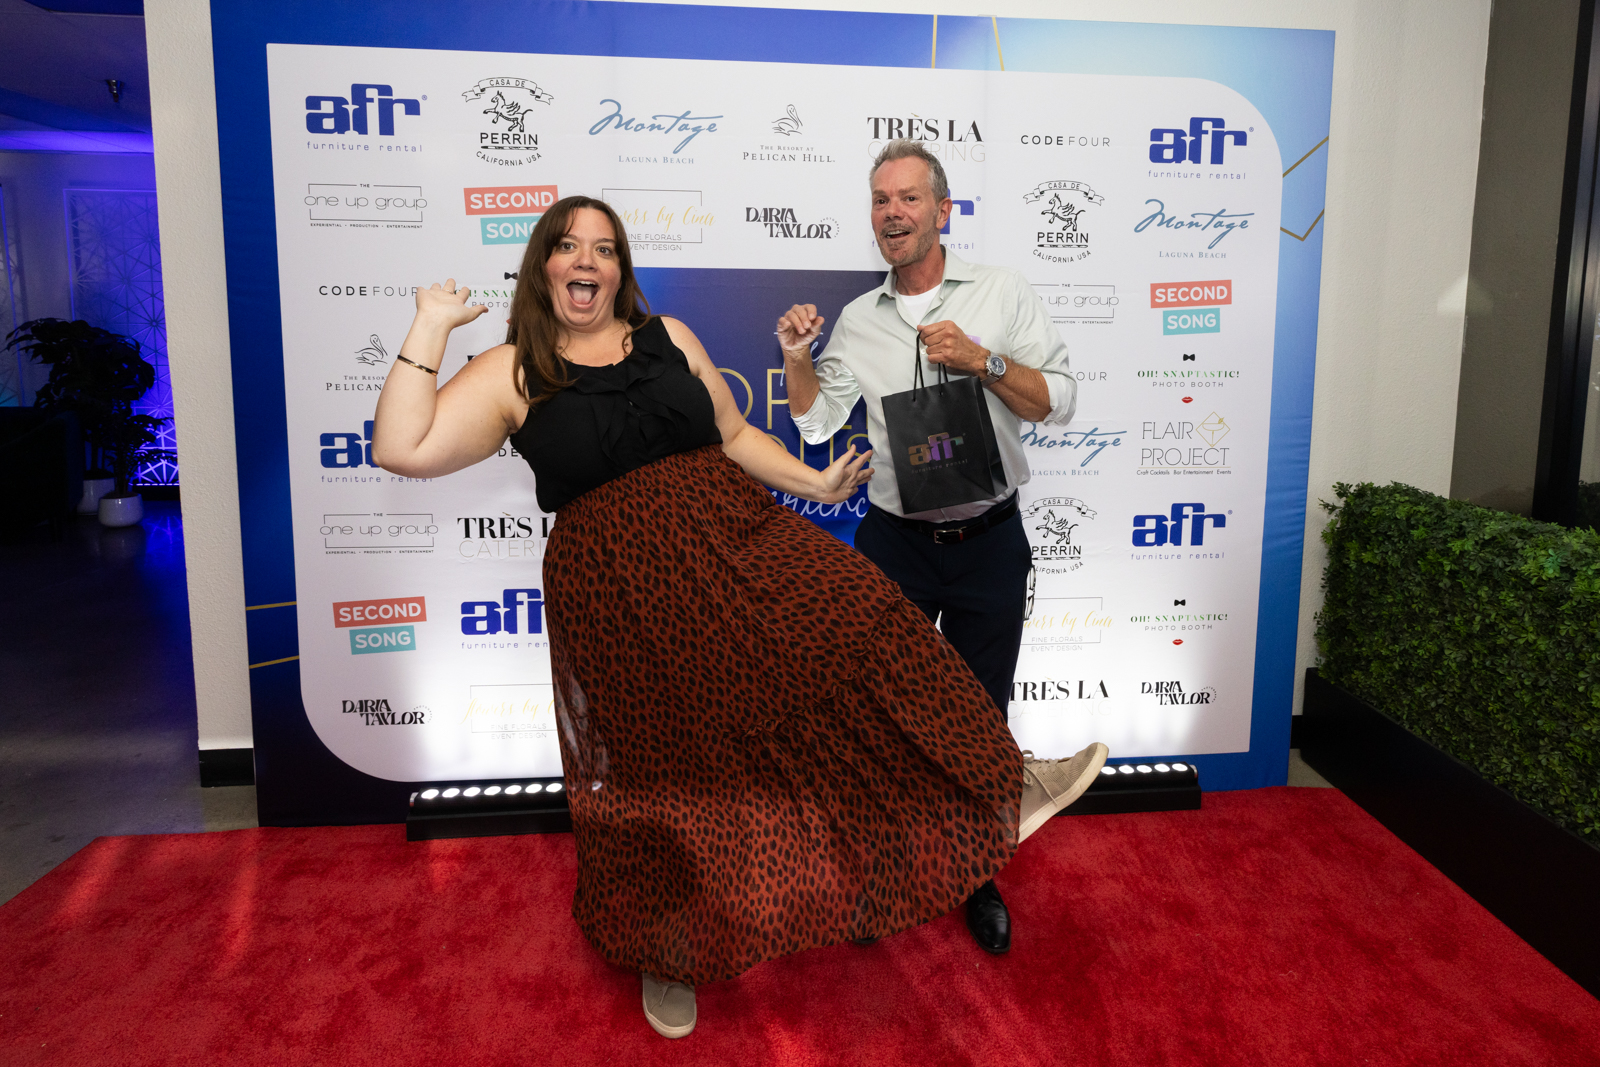 candid step and repeat photography